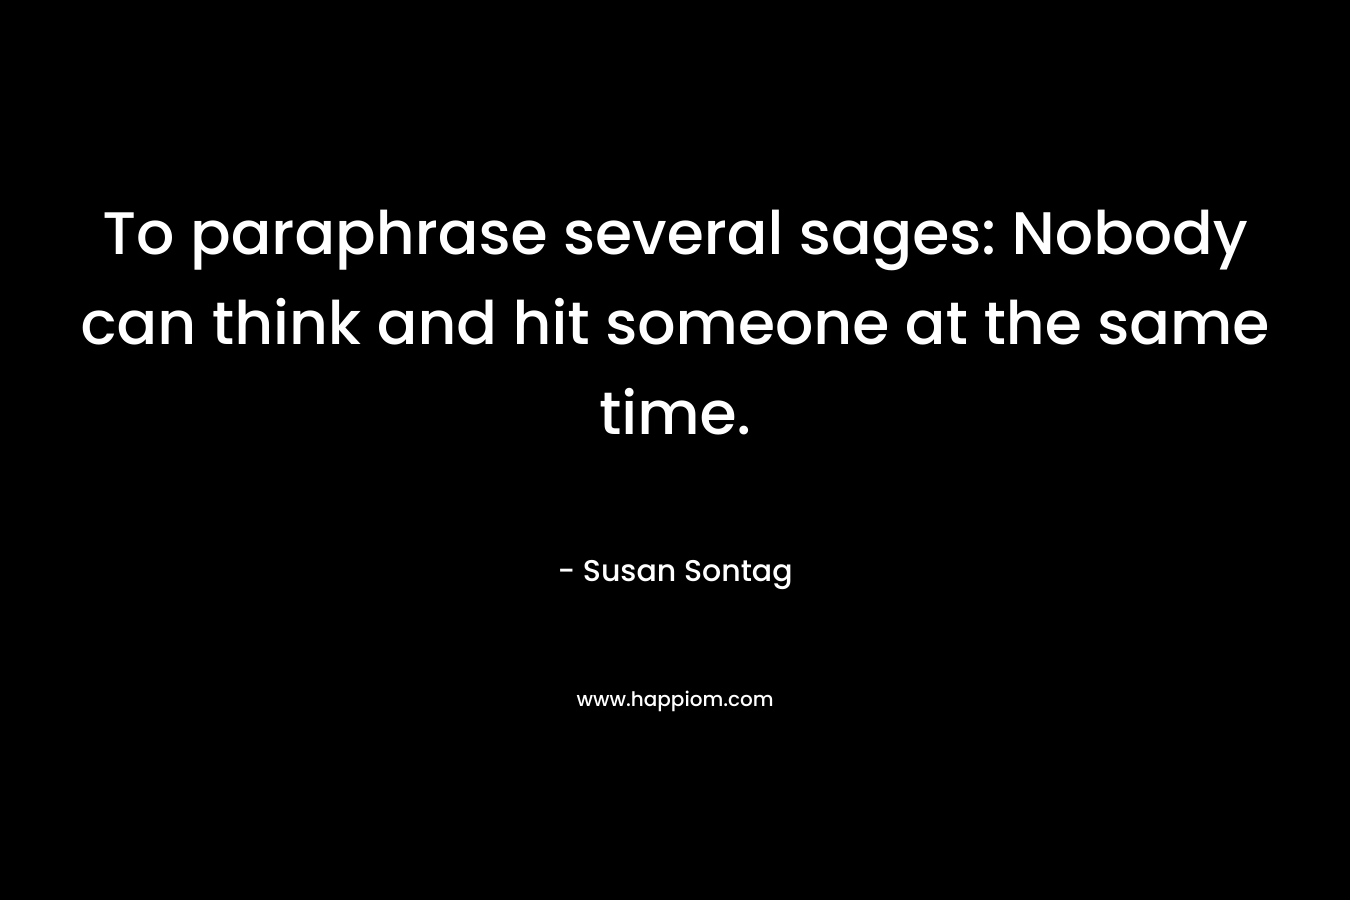 To paraphrase several sages: Nobody can think and hit someone at the same time. – Susan Sontag